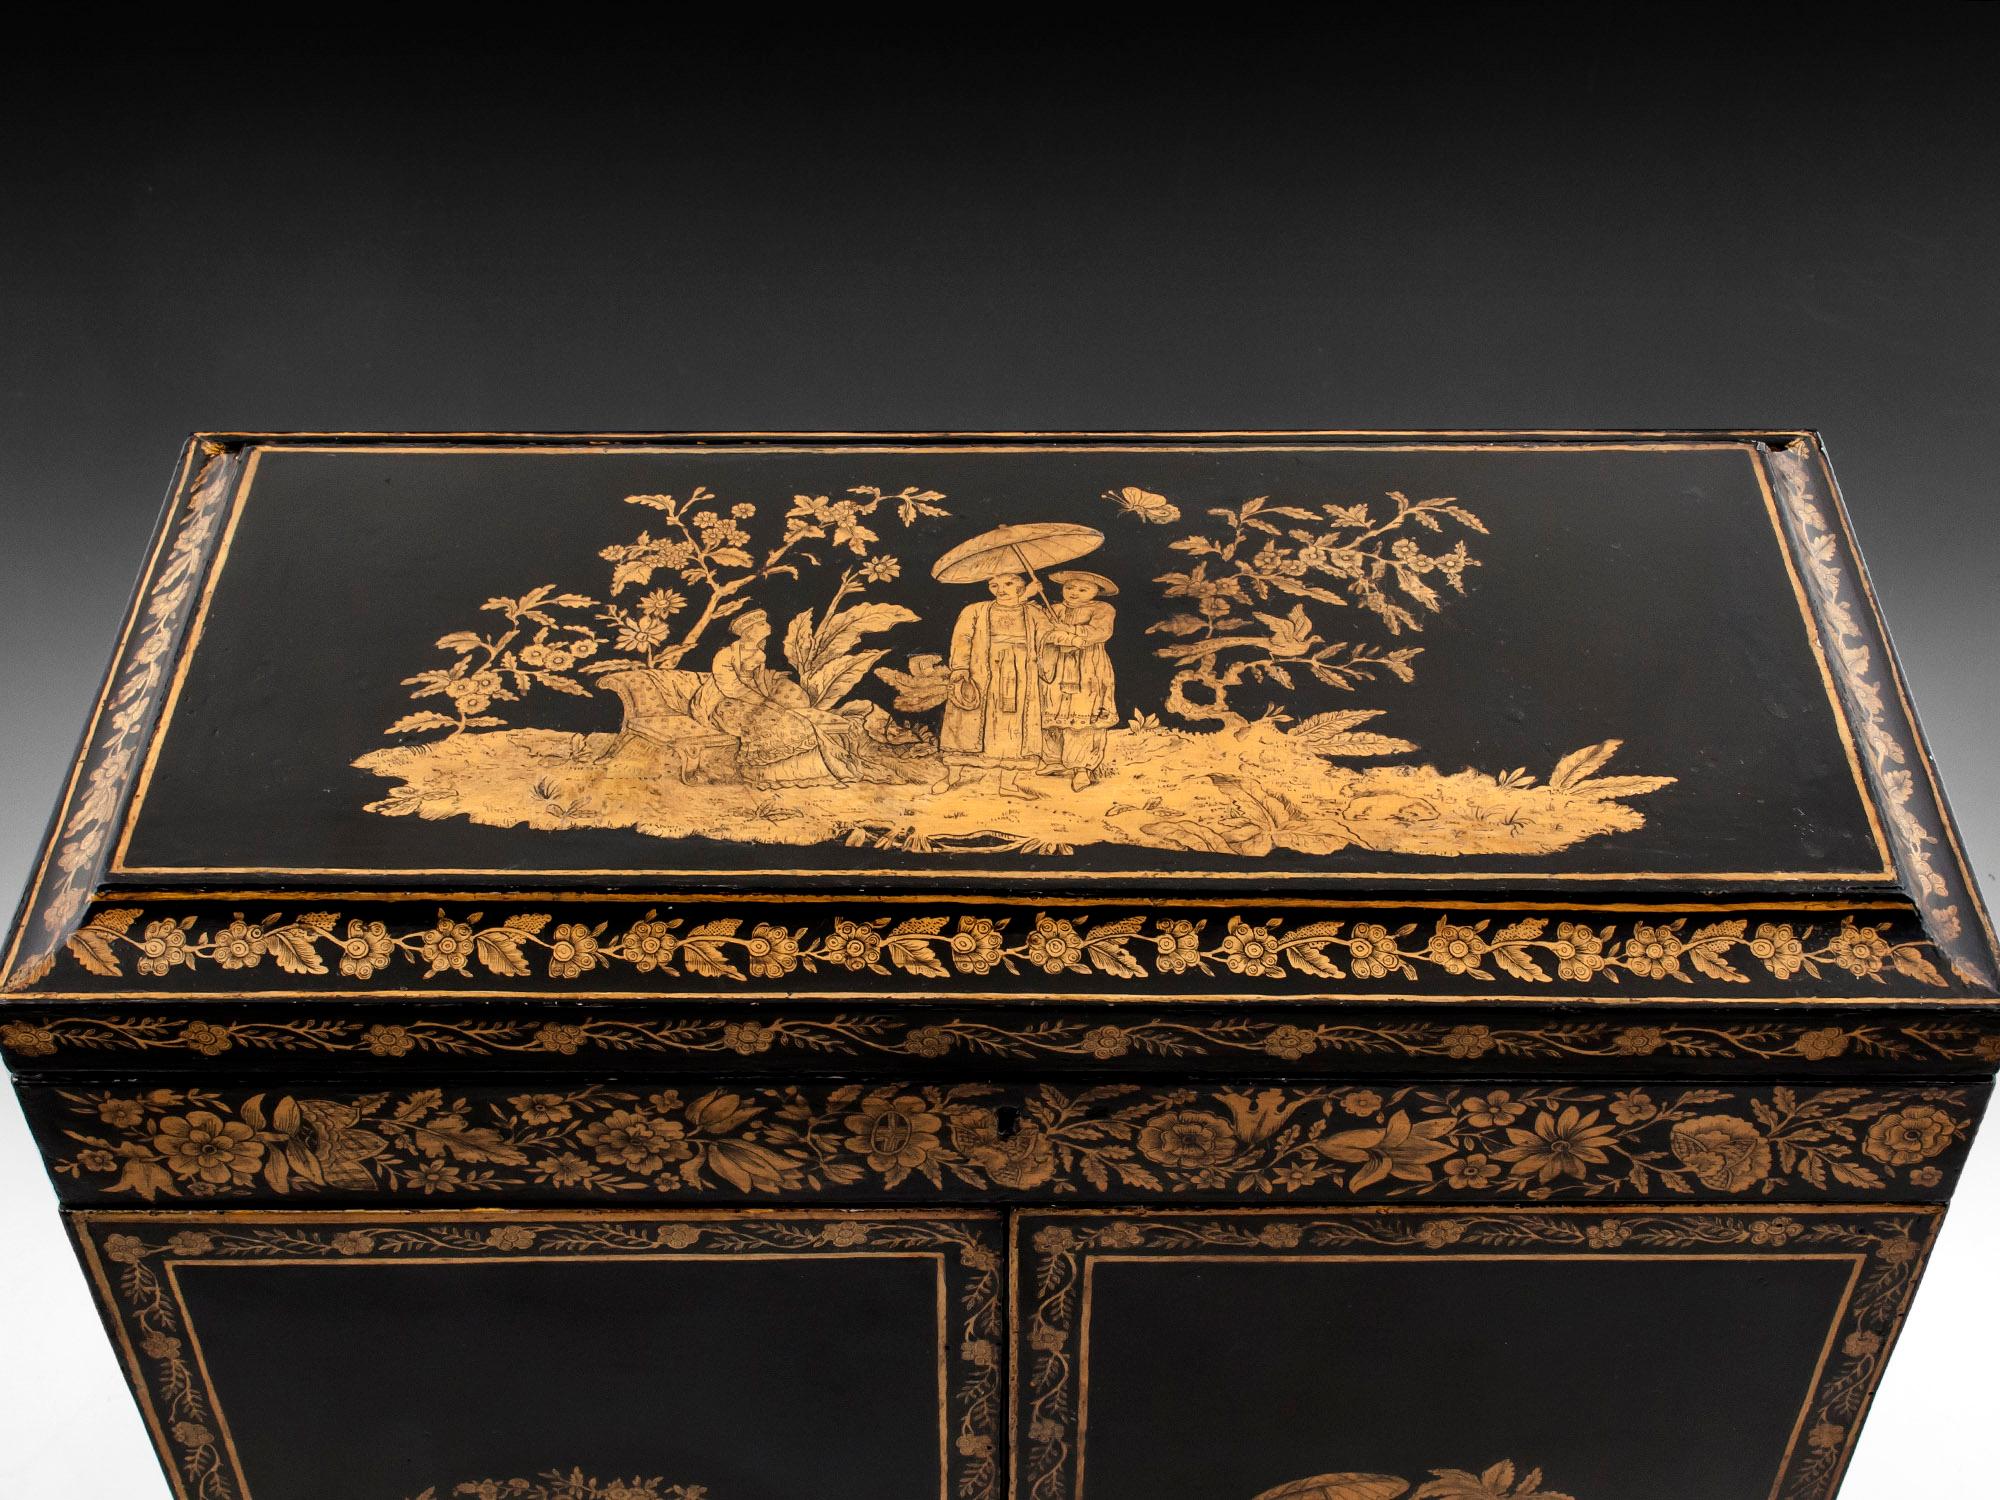 Antique Penwork cabinet, beautifully decorated with Chinioserie figures, landscapes and flowers, and containing a plethora of Grand Tour treasures. Lifting the lid reveals a red velvet compartment and original mirror plate. The doors open to reveal